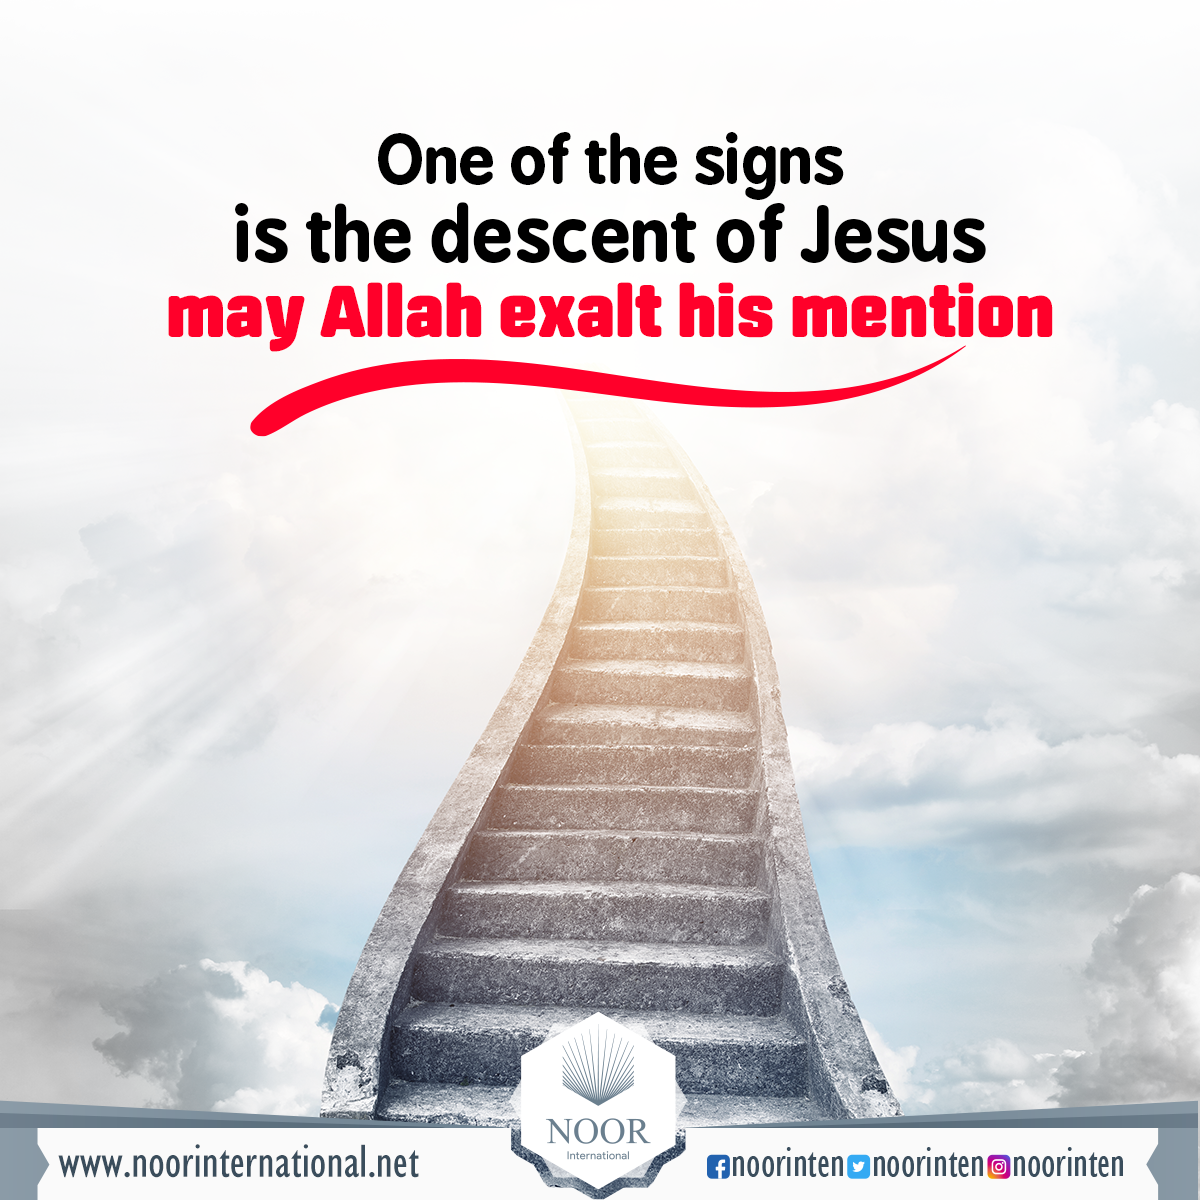 One of the signs of the last day is the descent of Jesus may Allah exalt his mention